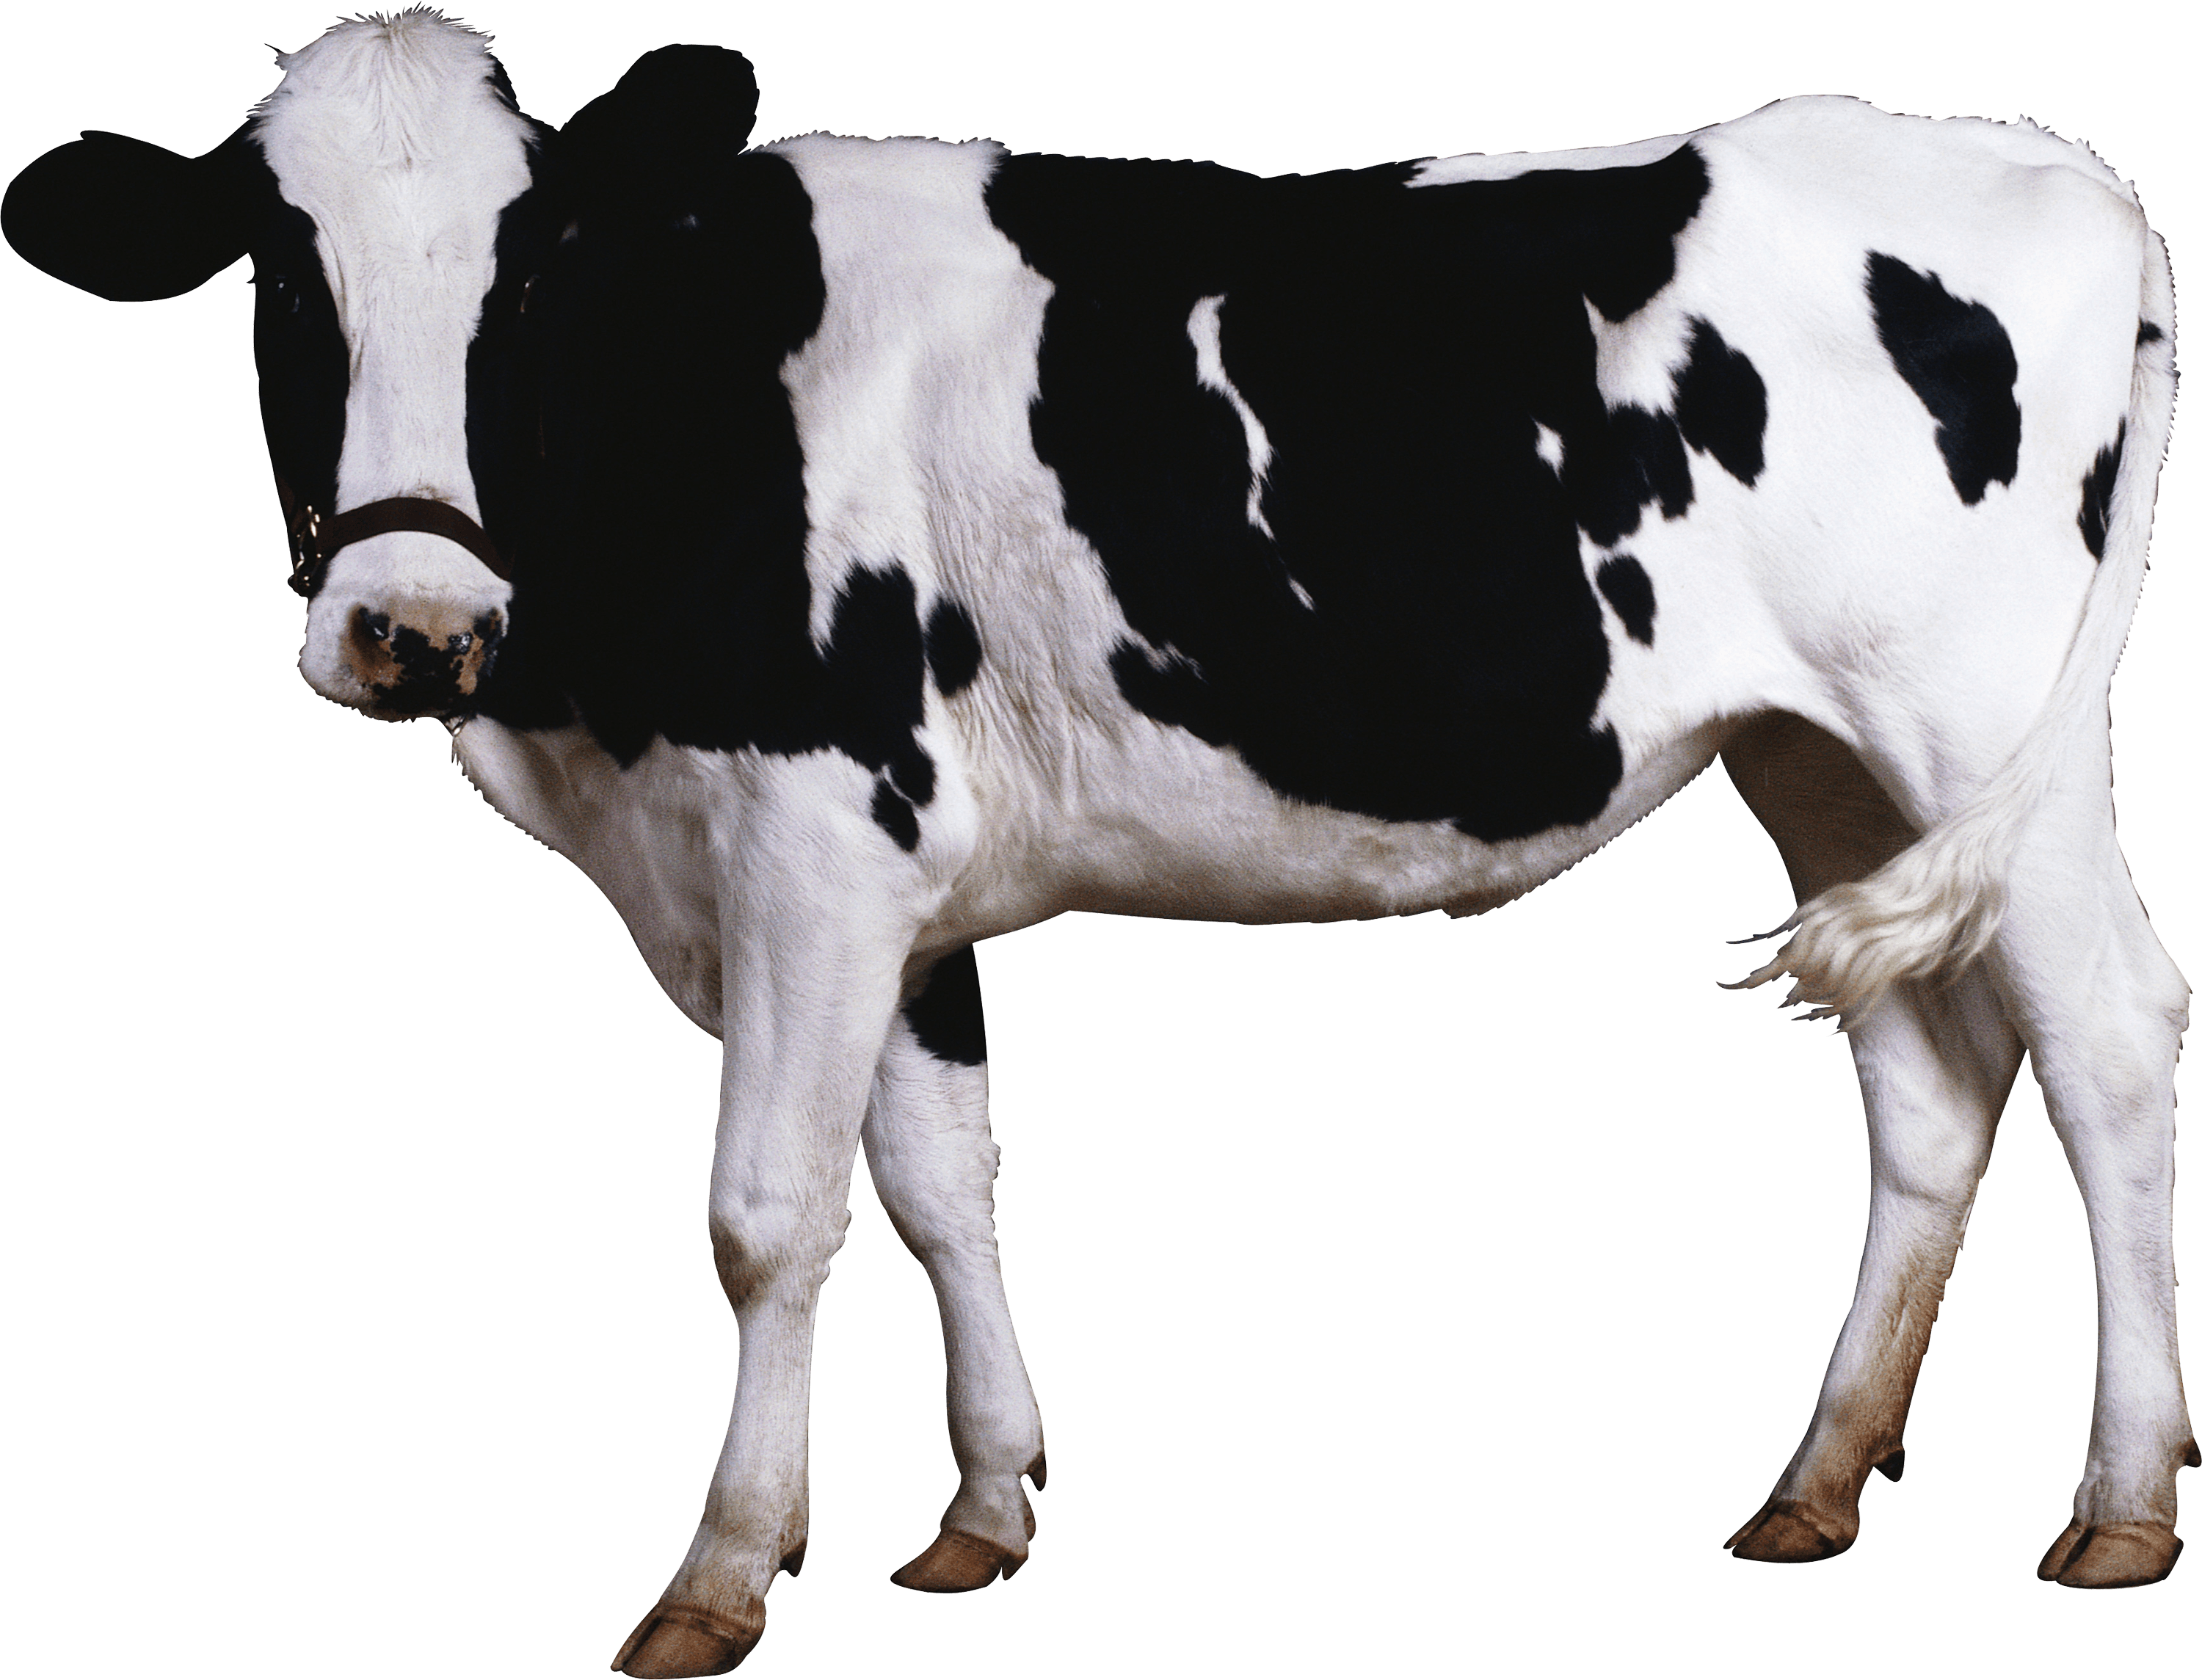 Png image free cows. Cow clipart prize